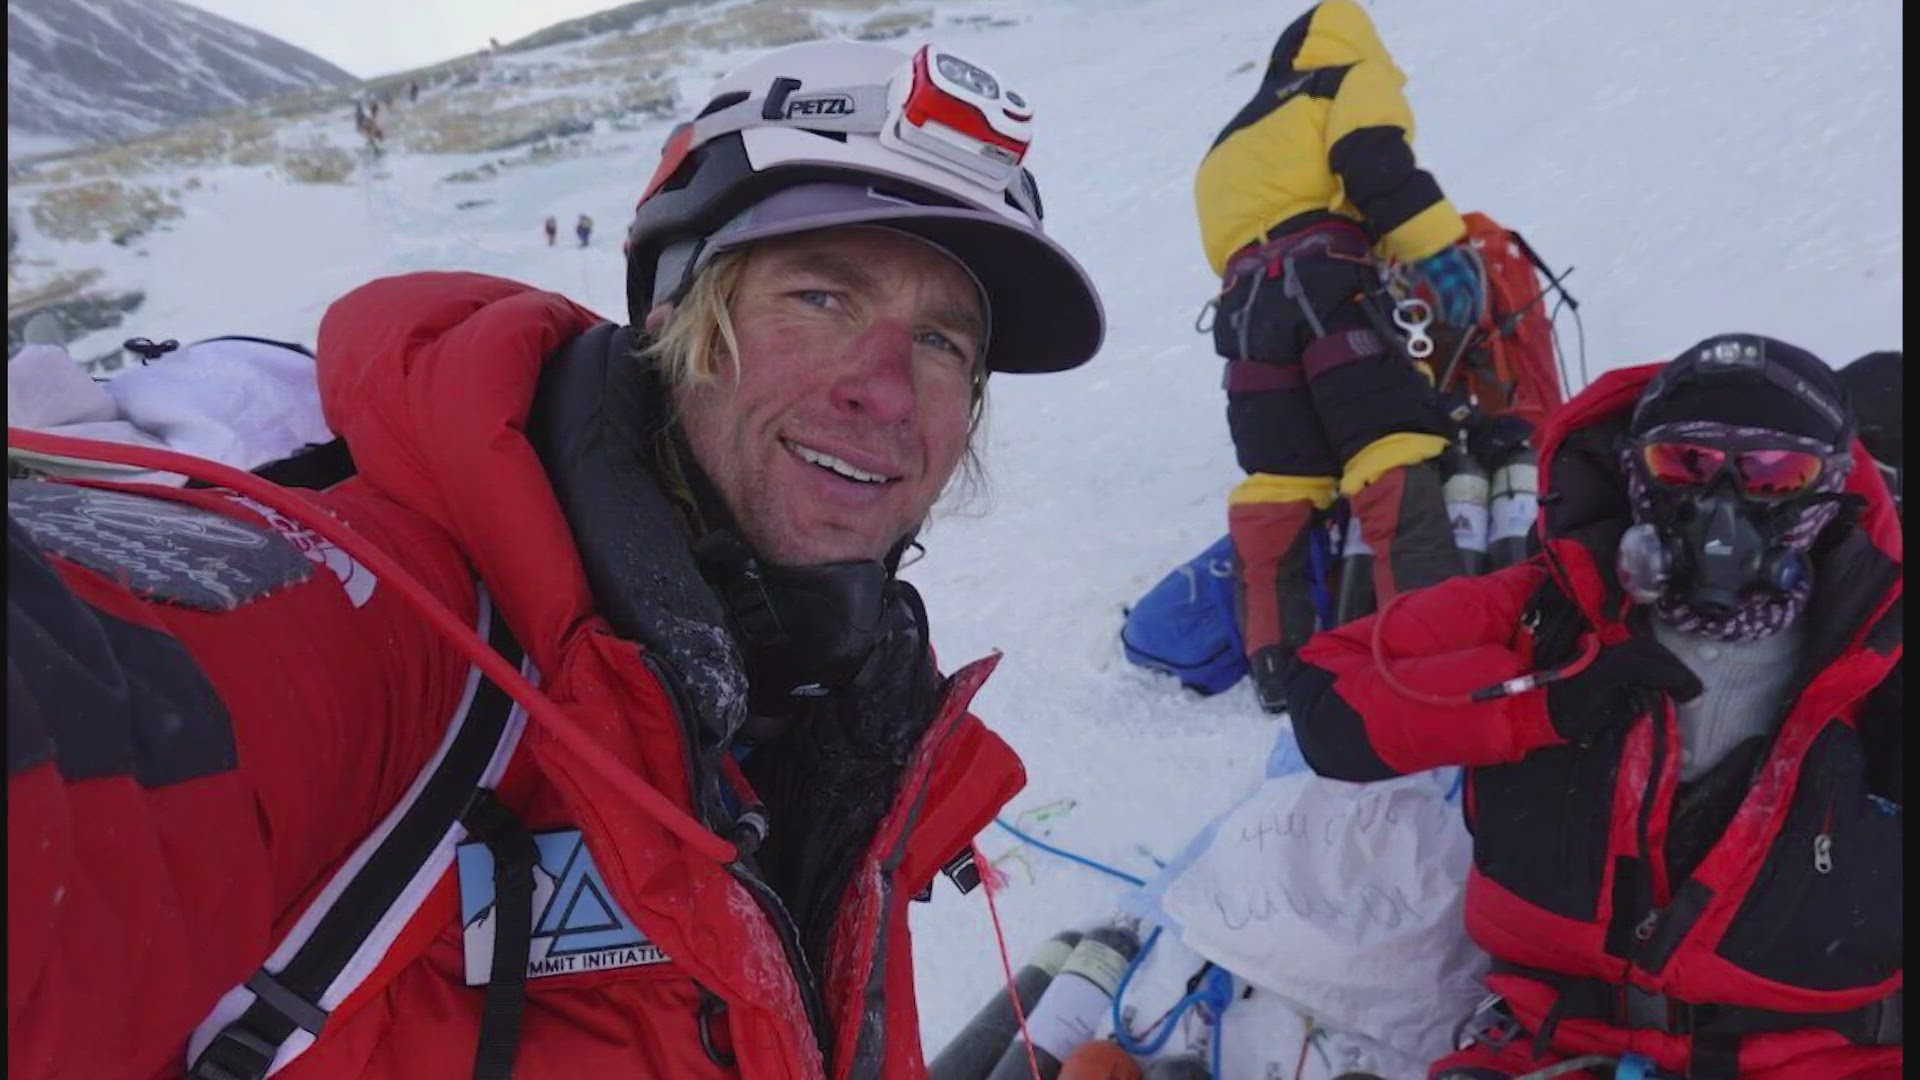 Travis Van Overbeke began his journey to summit the tallest mountain on each continent 15 years ago.